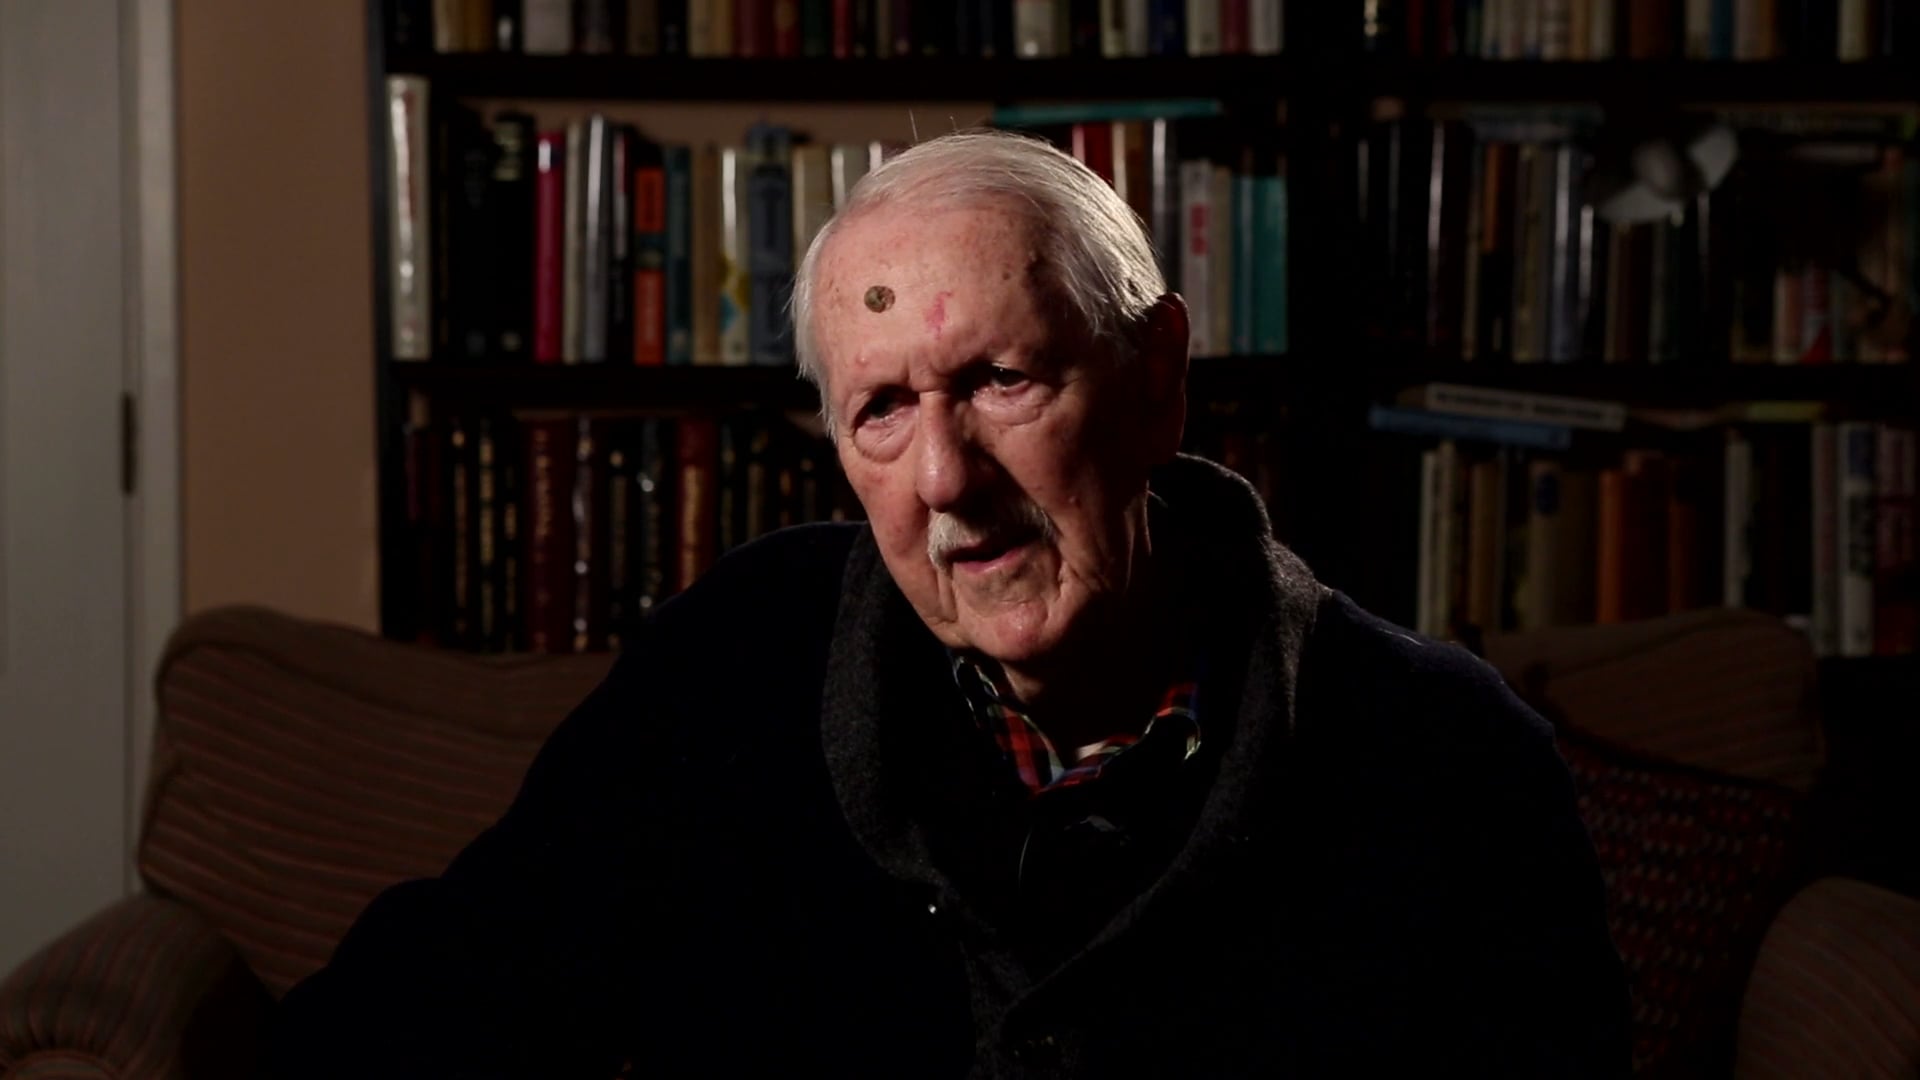 'The Whip Donovan Adventures' by Brian Aldiss (Unbound promo)